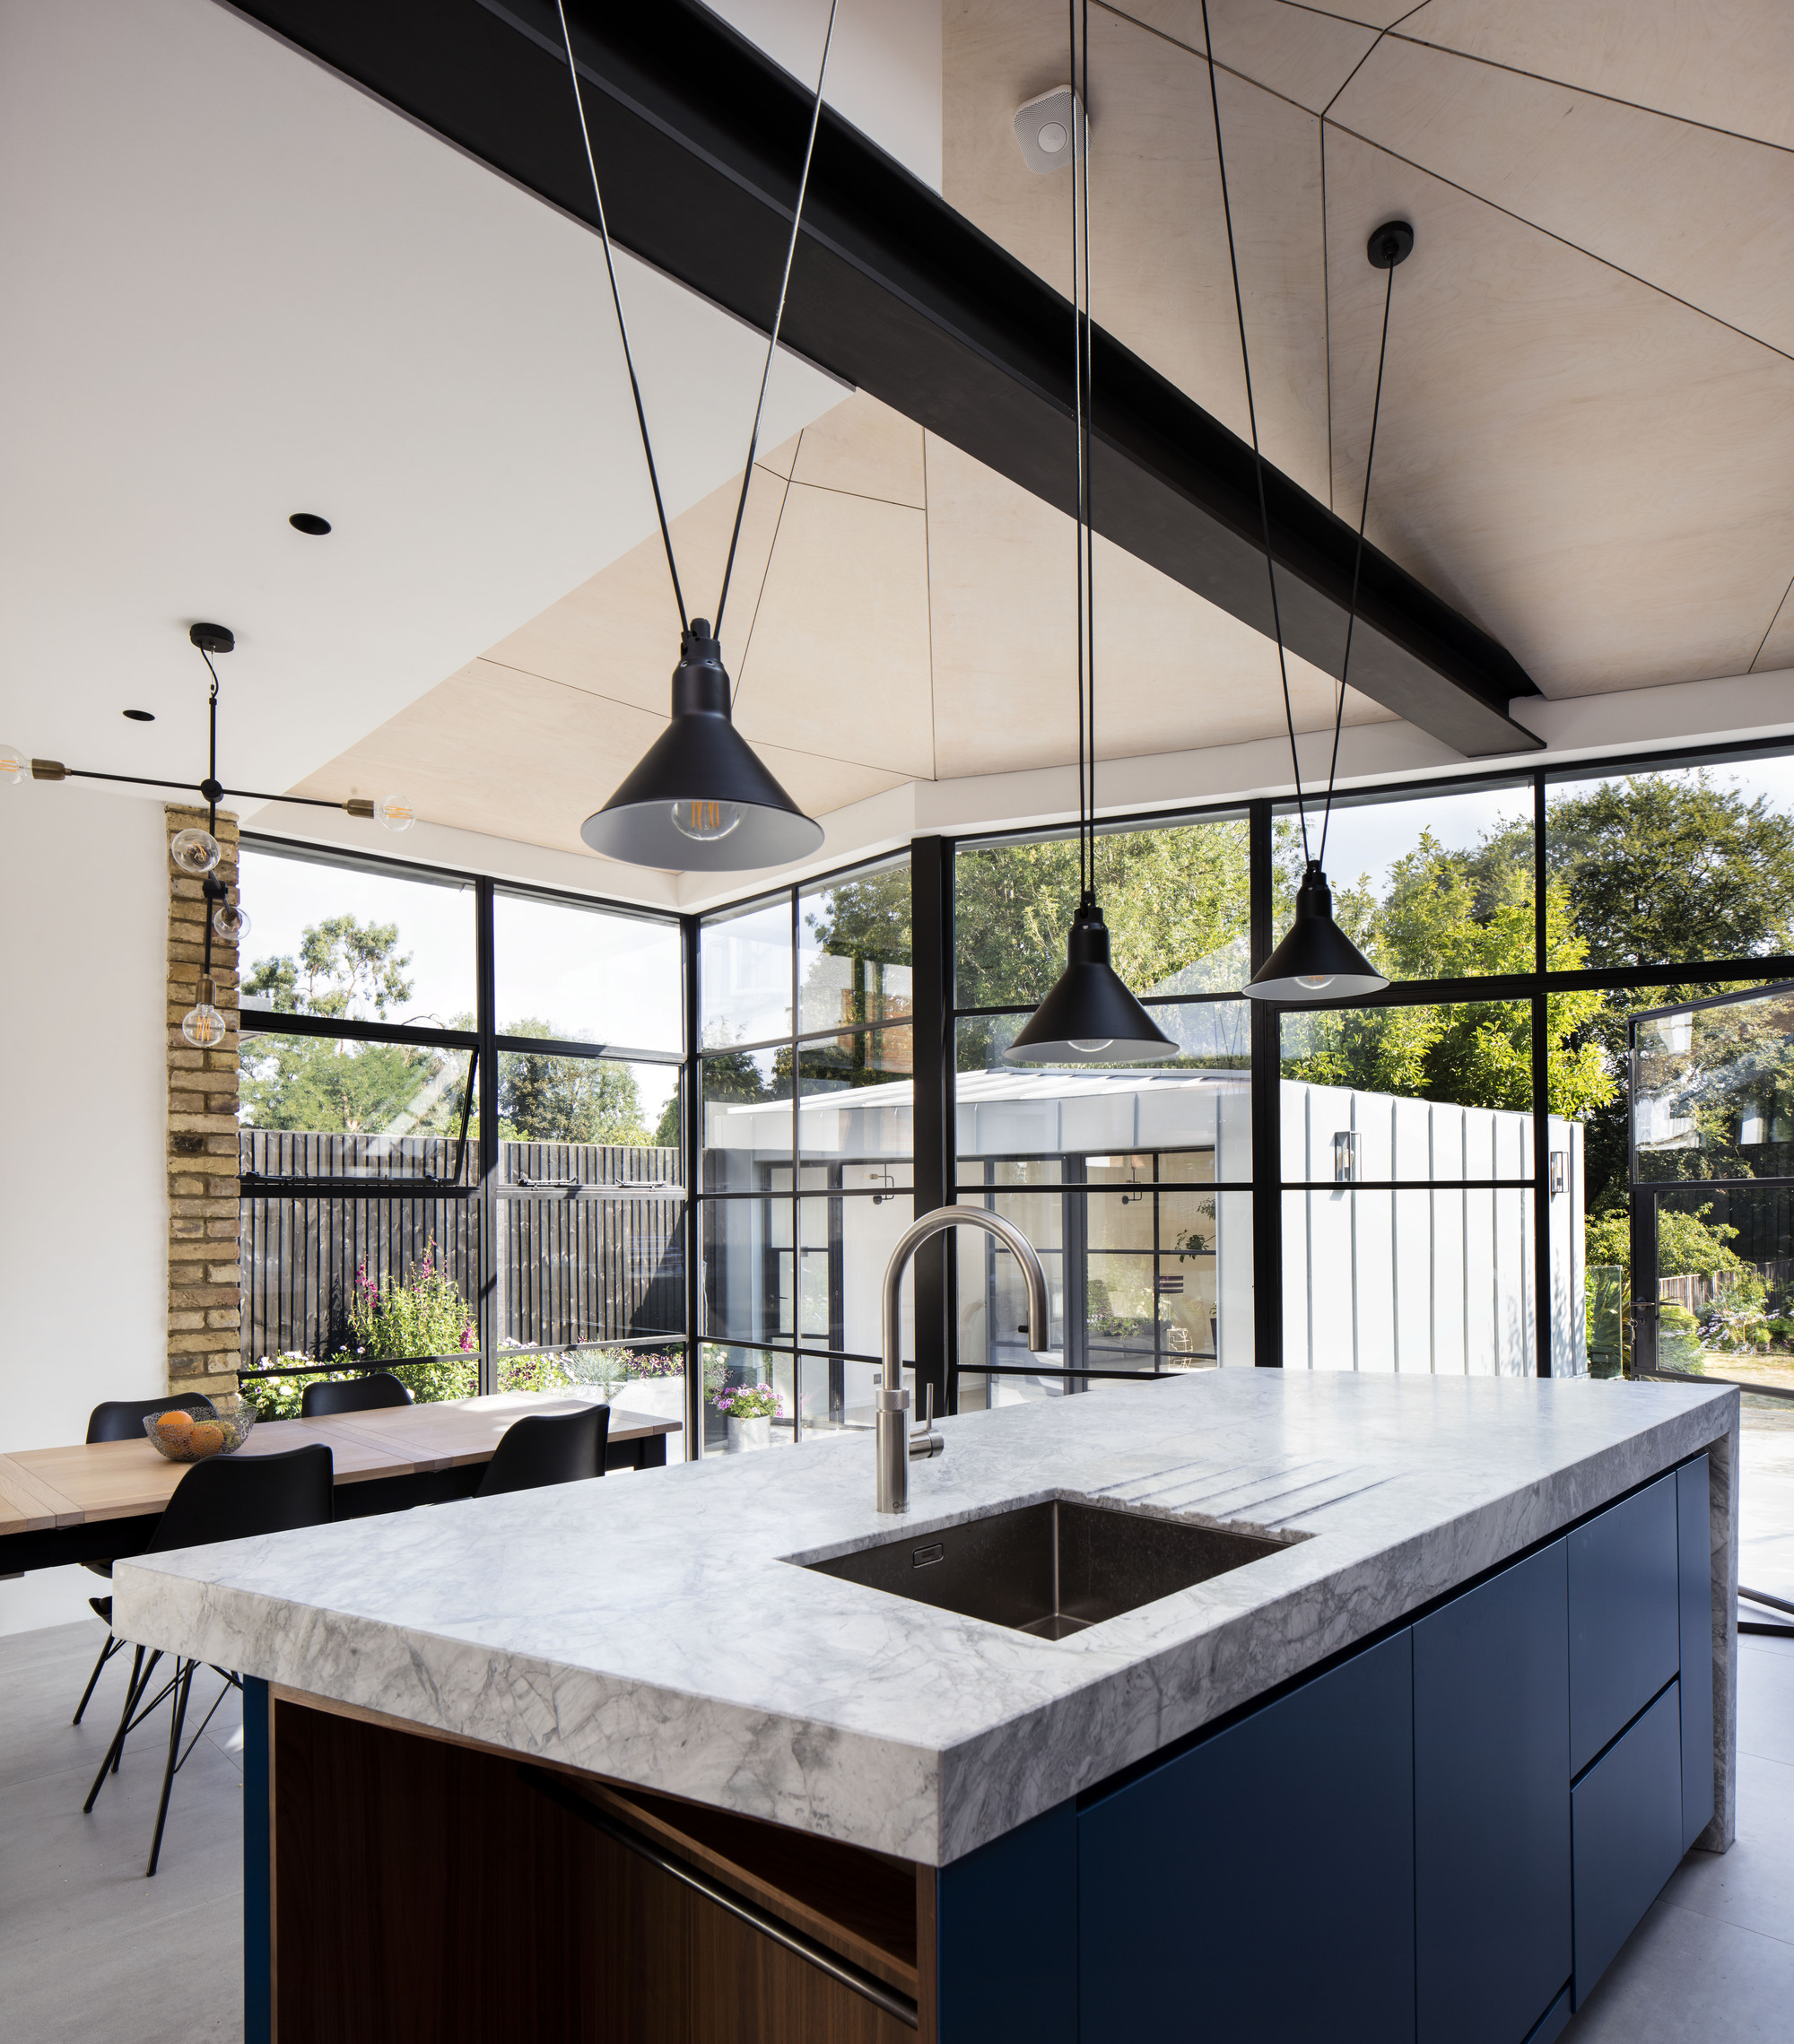 Angular plywood roof, custom kitchen island and dining space of the renovated London home